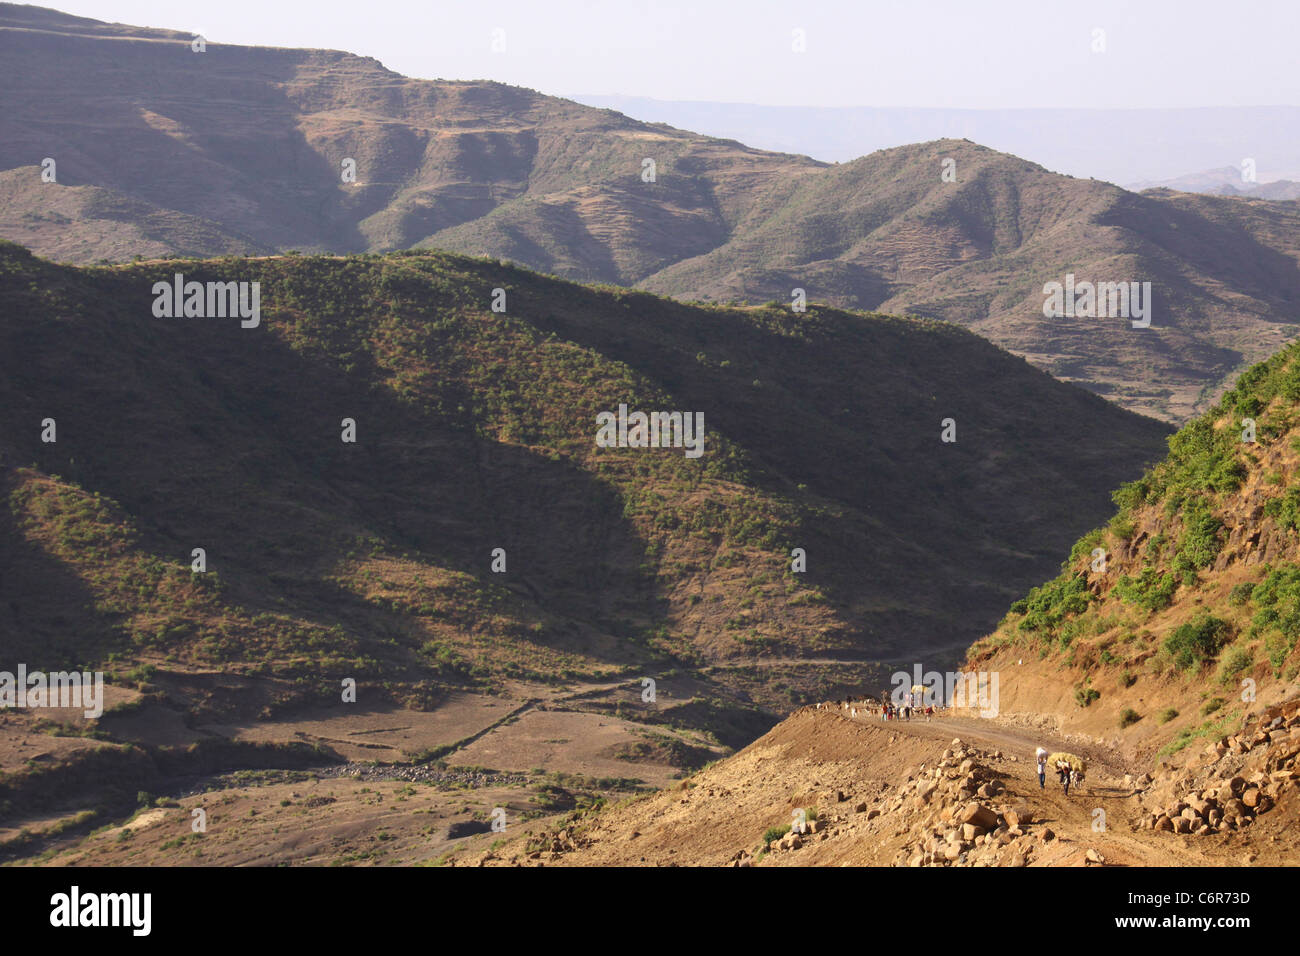 A scenic view of mountain ranges and valleys Stock Photo